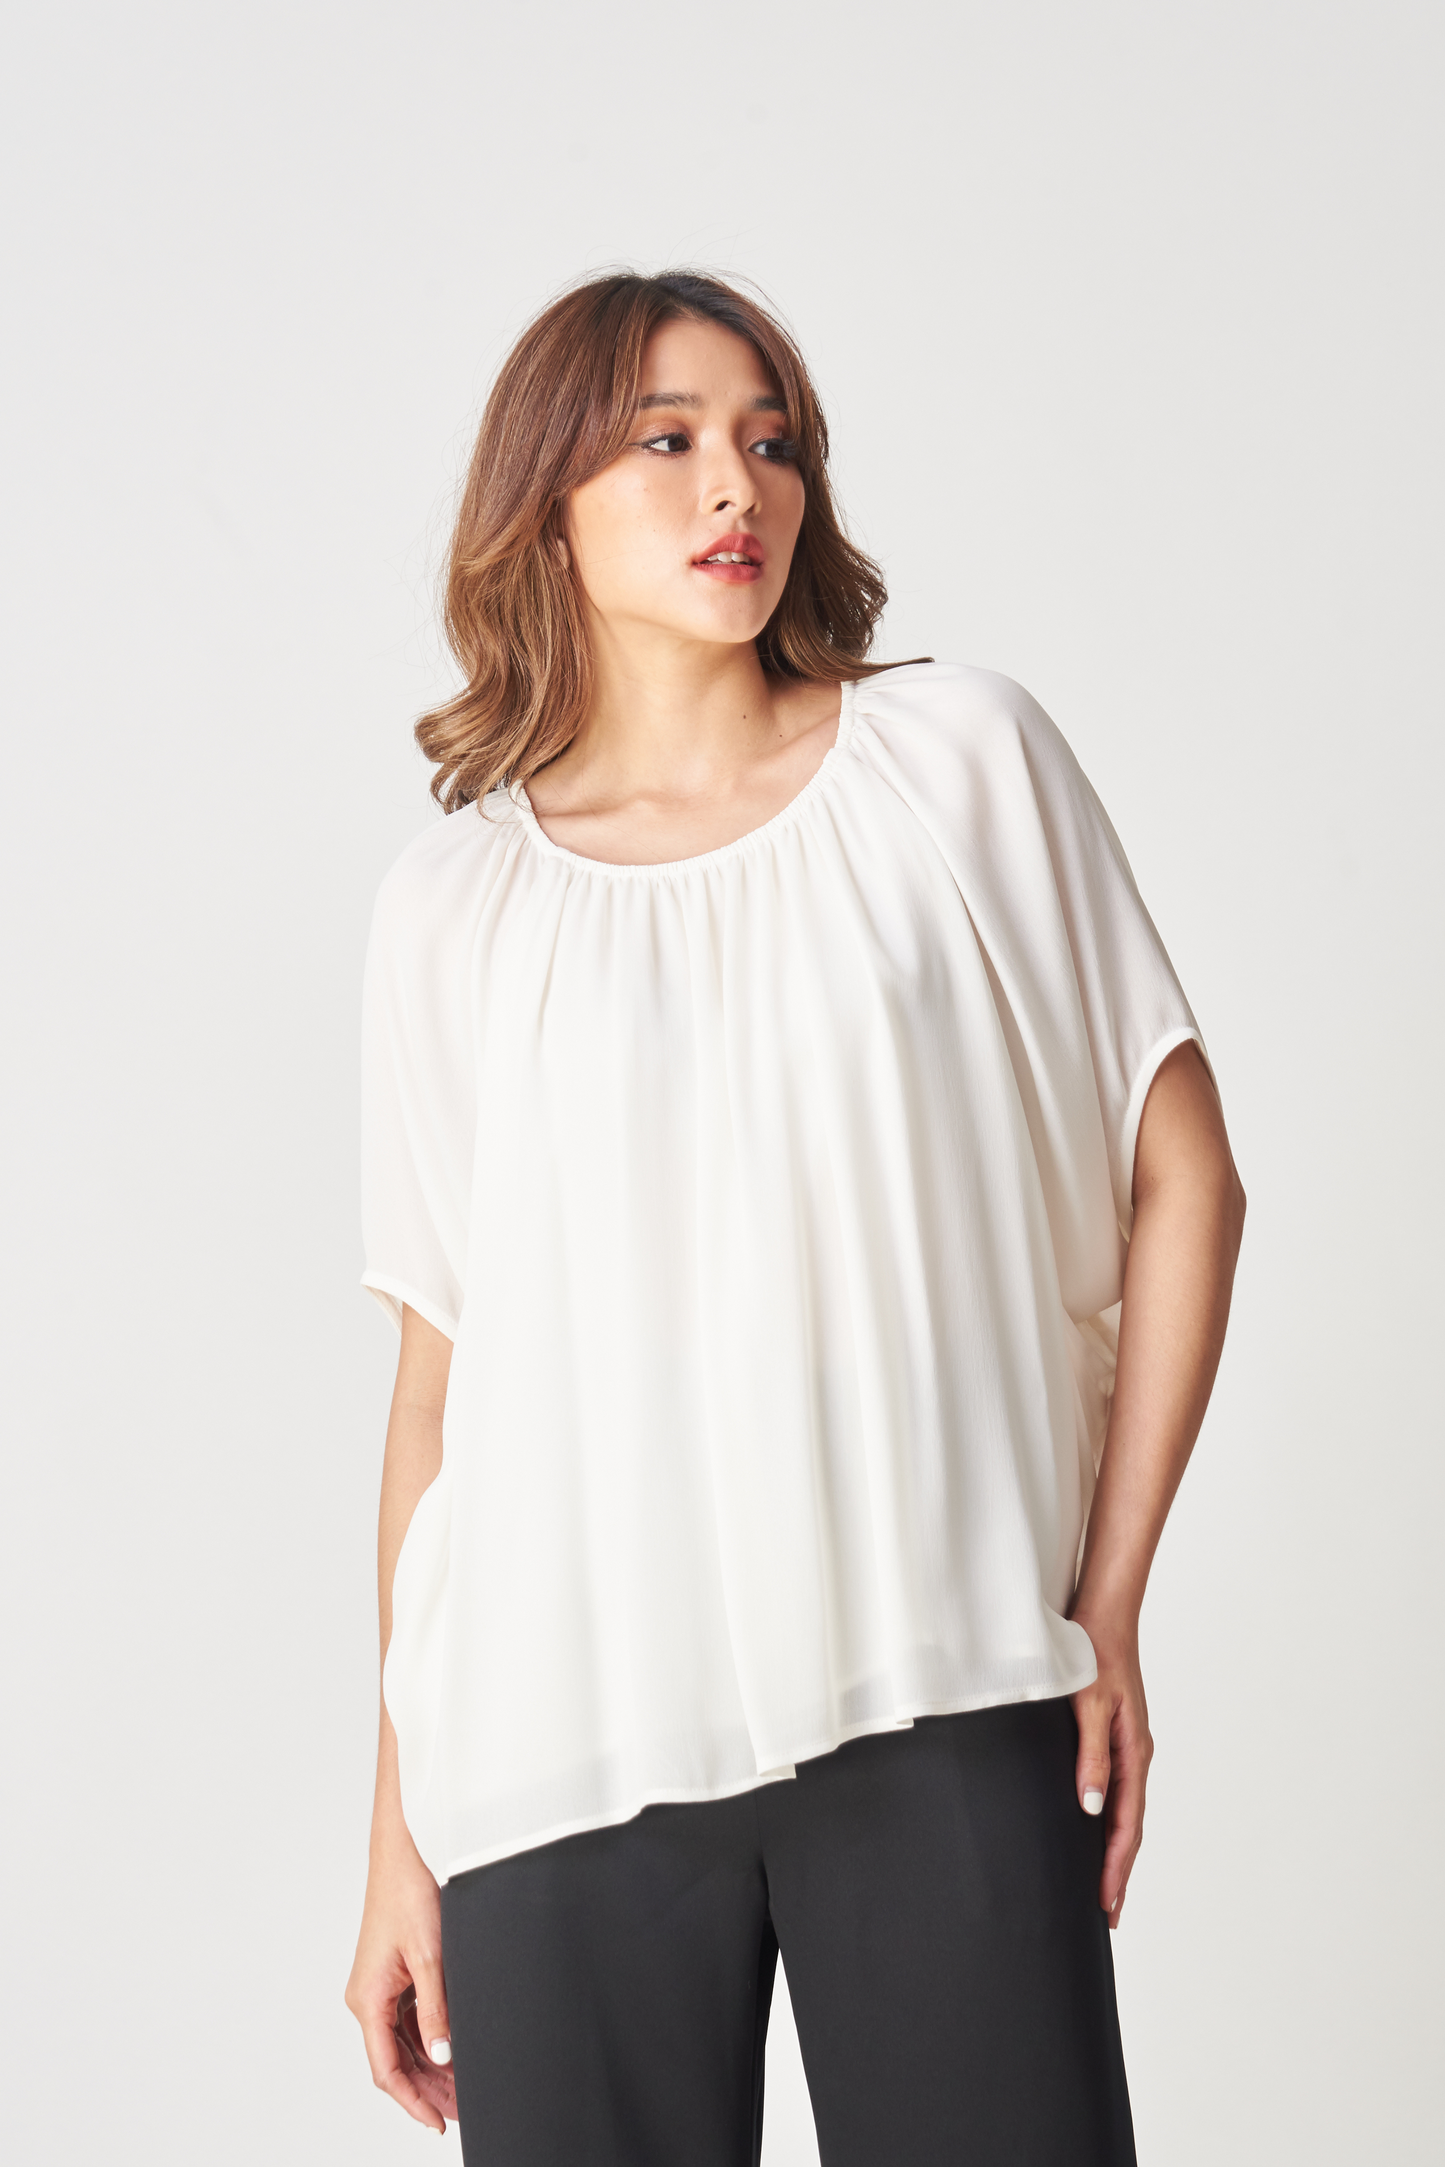 Flowing Blouse with Gatherered Neckline